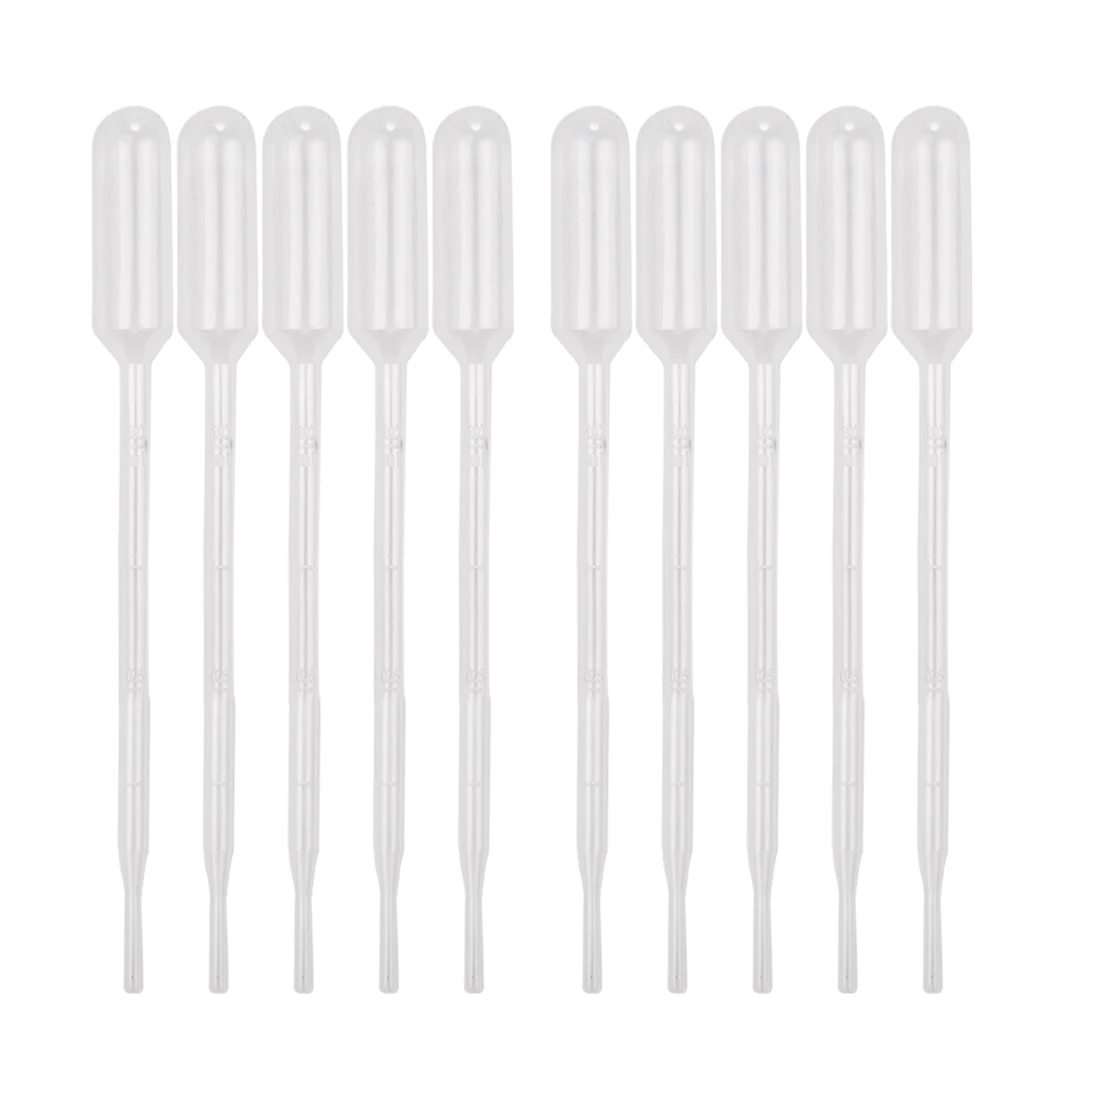 

10pcs 1ml 3ml Disposable Dropper Plastic Squeeze Transfer Pipettes For Silicone Mold UV Epoxy Resin Craft Jewelry Making